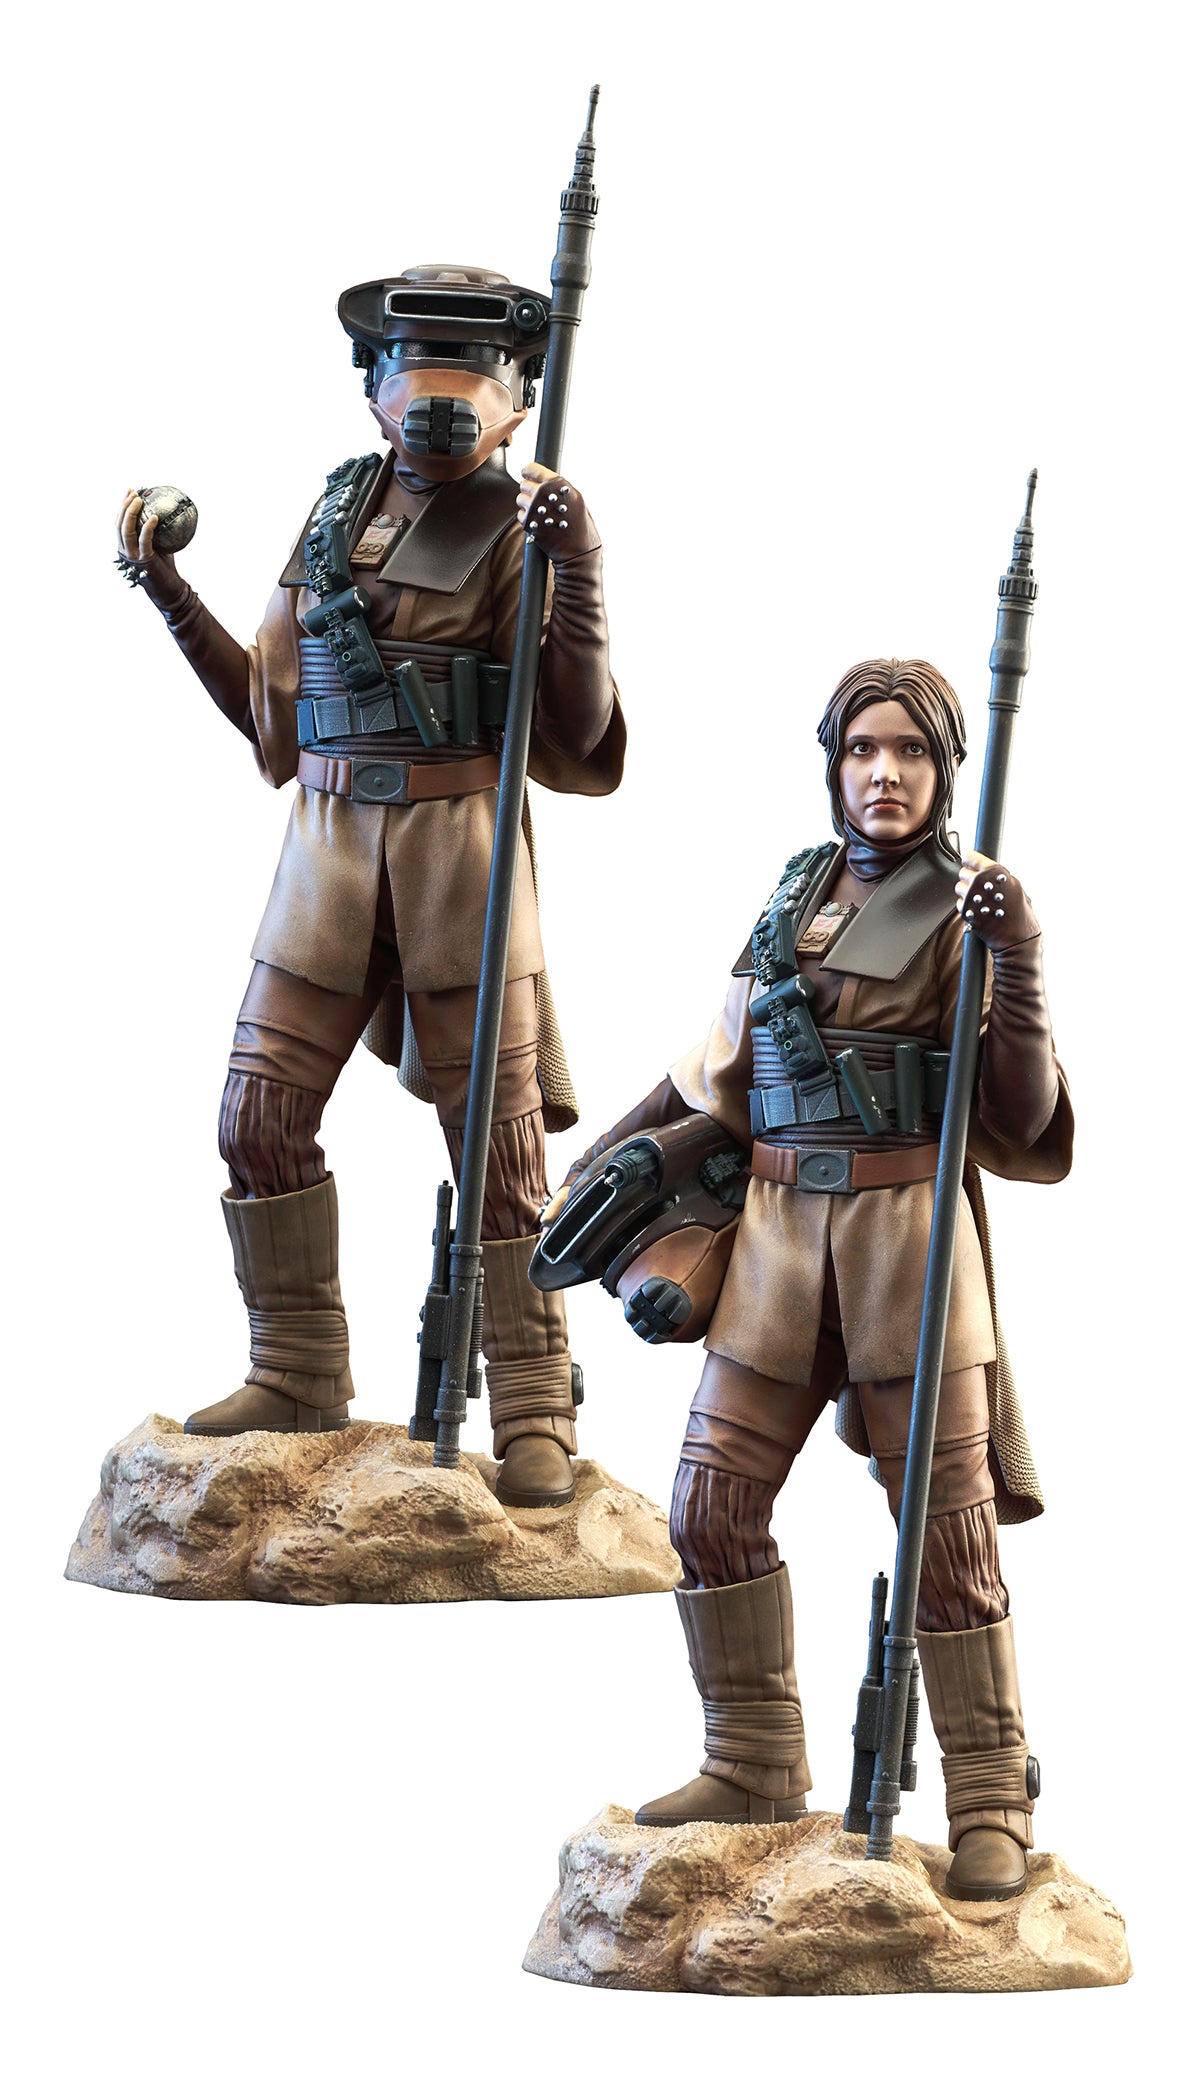 Star Wars Premier Collection ROTJ Leia in Boushh Disguise Statue